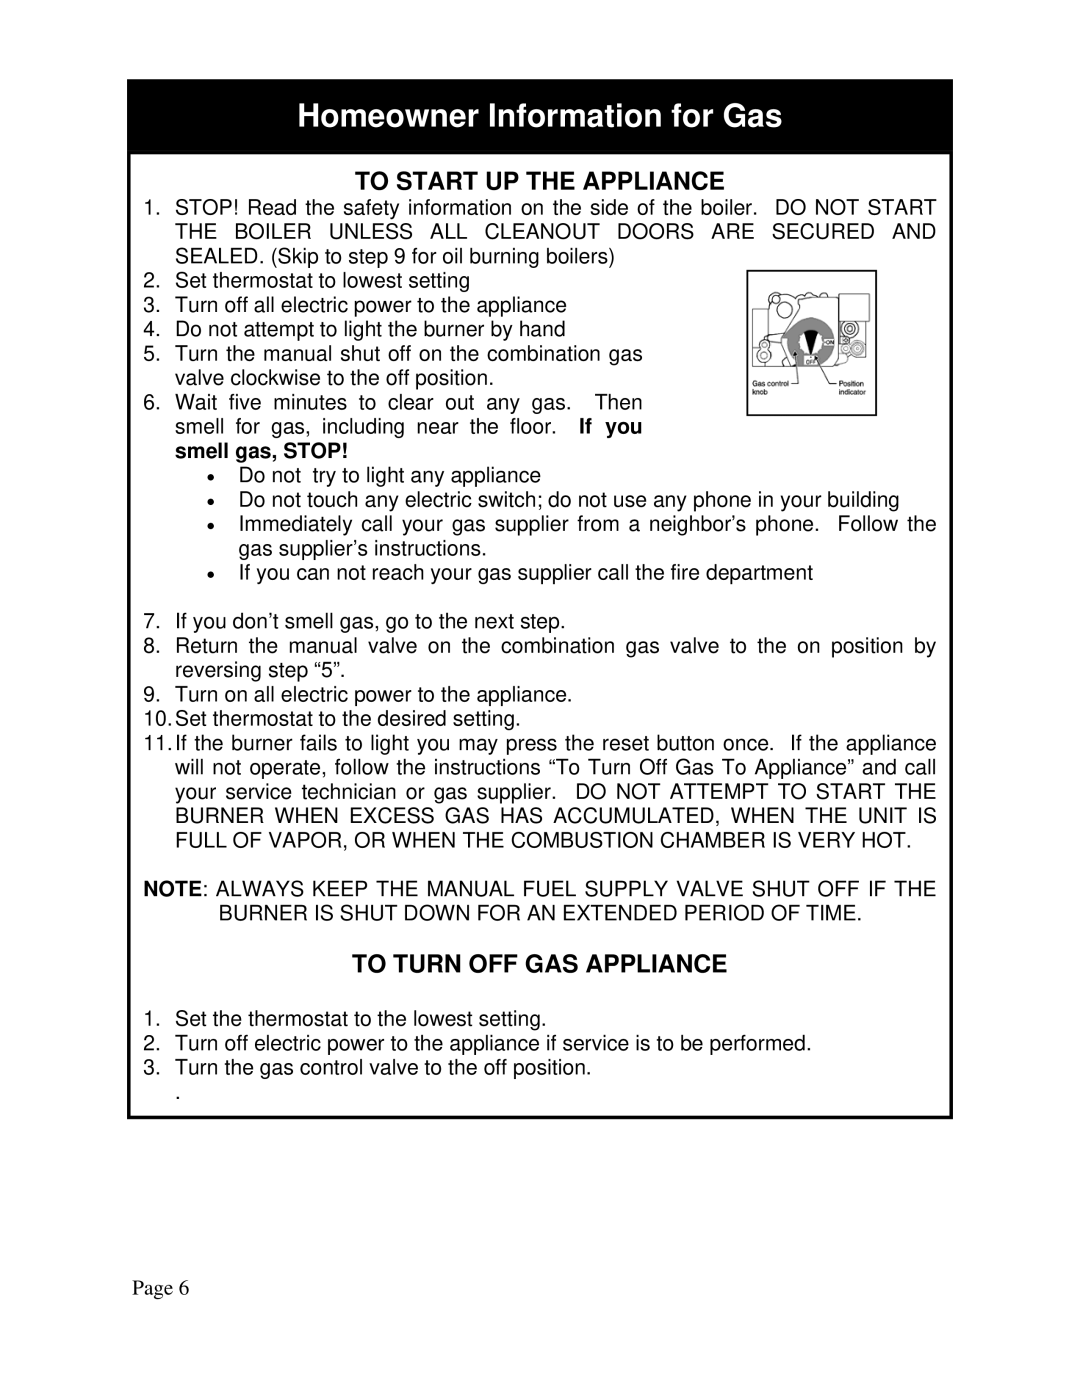 QHT B3-B9 installation instructions Homeowner Information for Gas, To Start UP the Appliance 